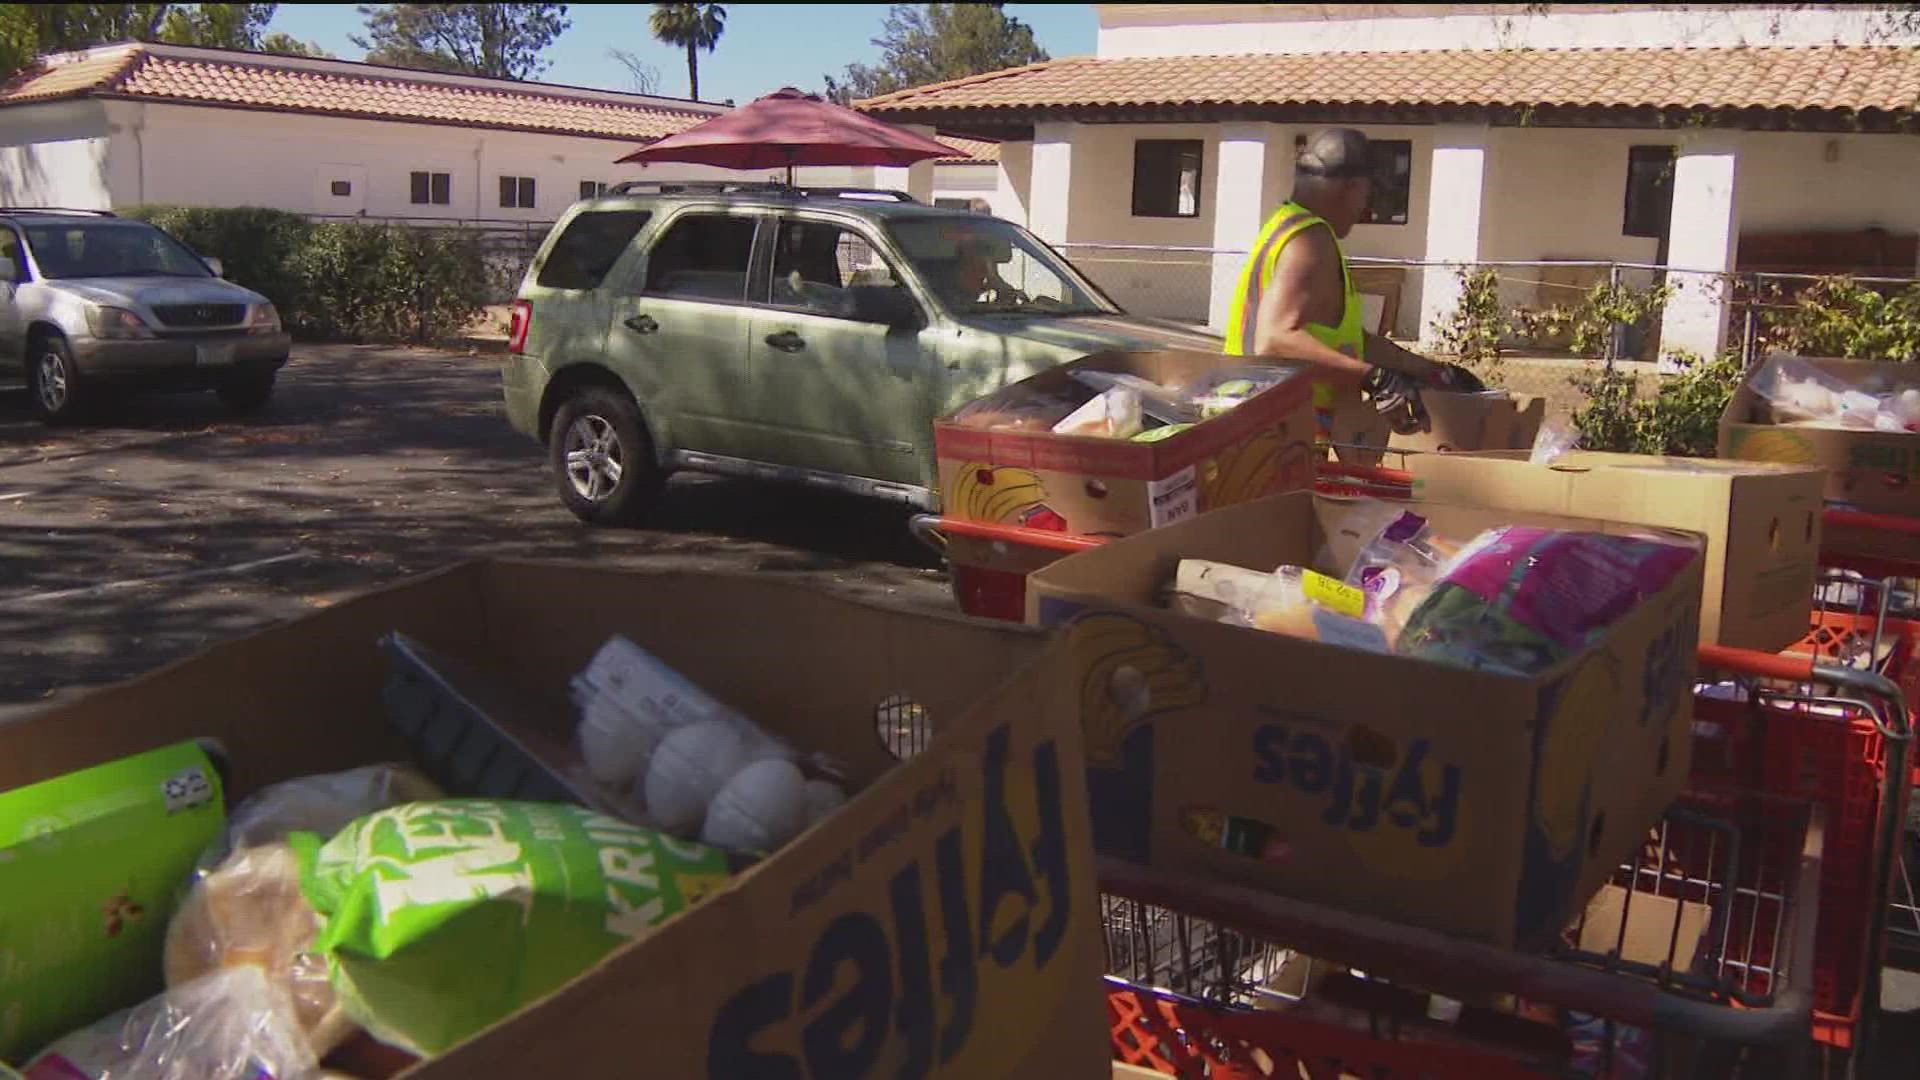 More than a quarter of county residents are facing nutritional insecurity, a report released Wednesday by the San Diego Hunger Coalition revealed.